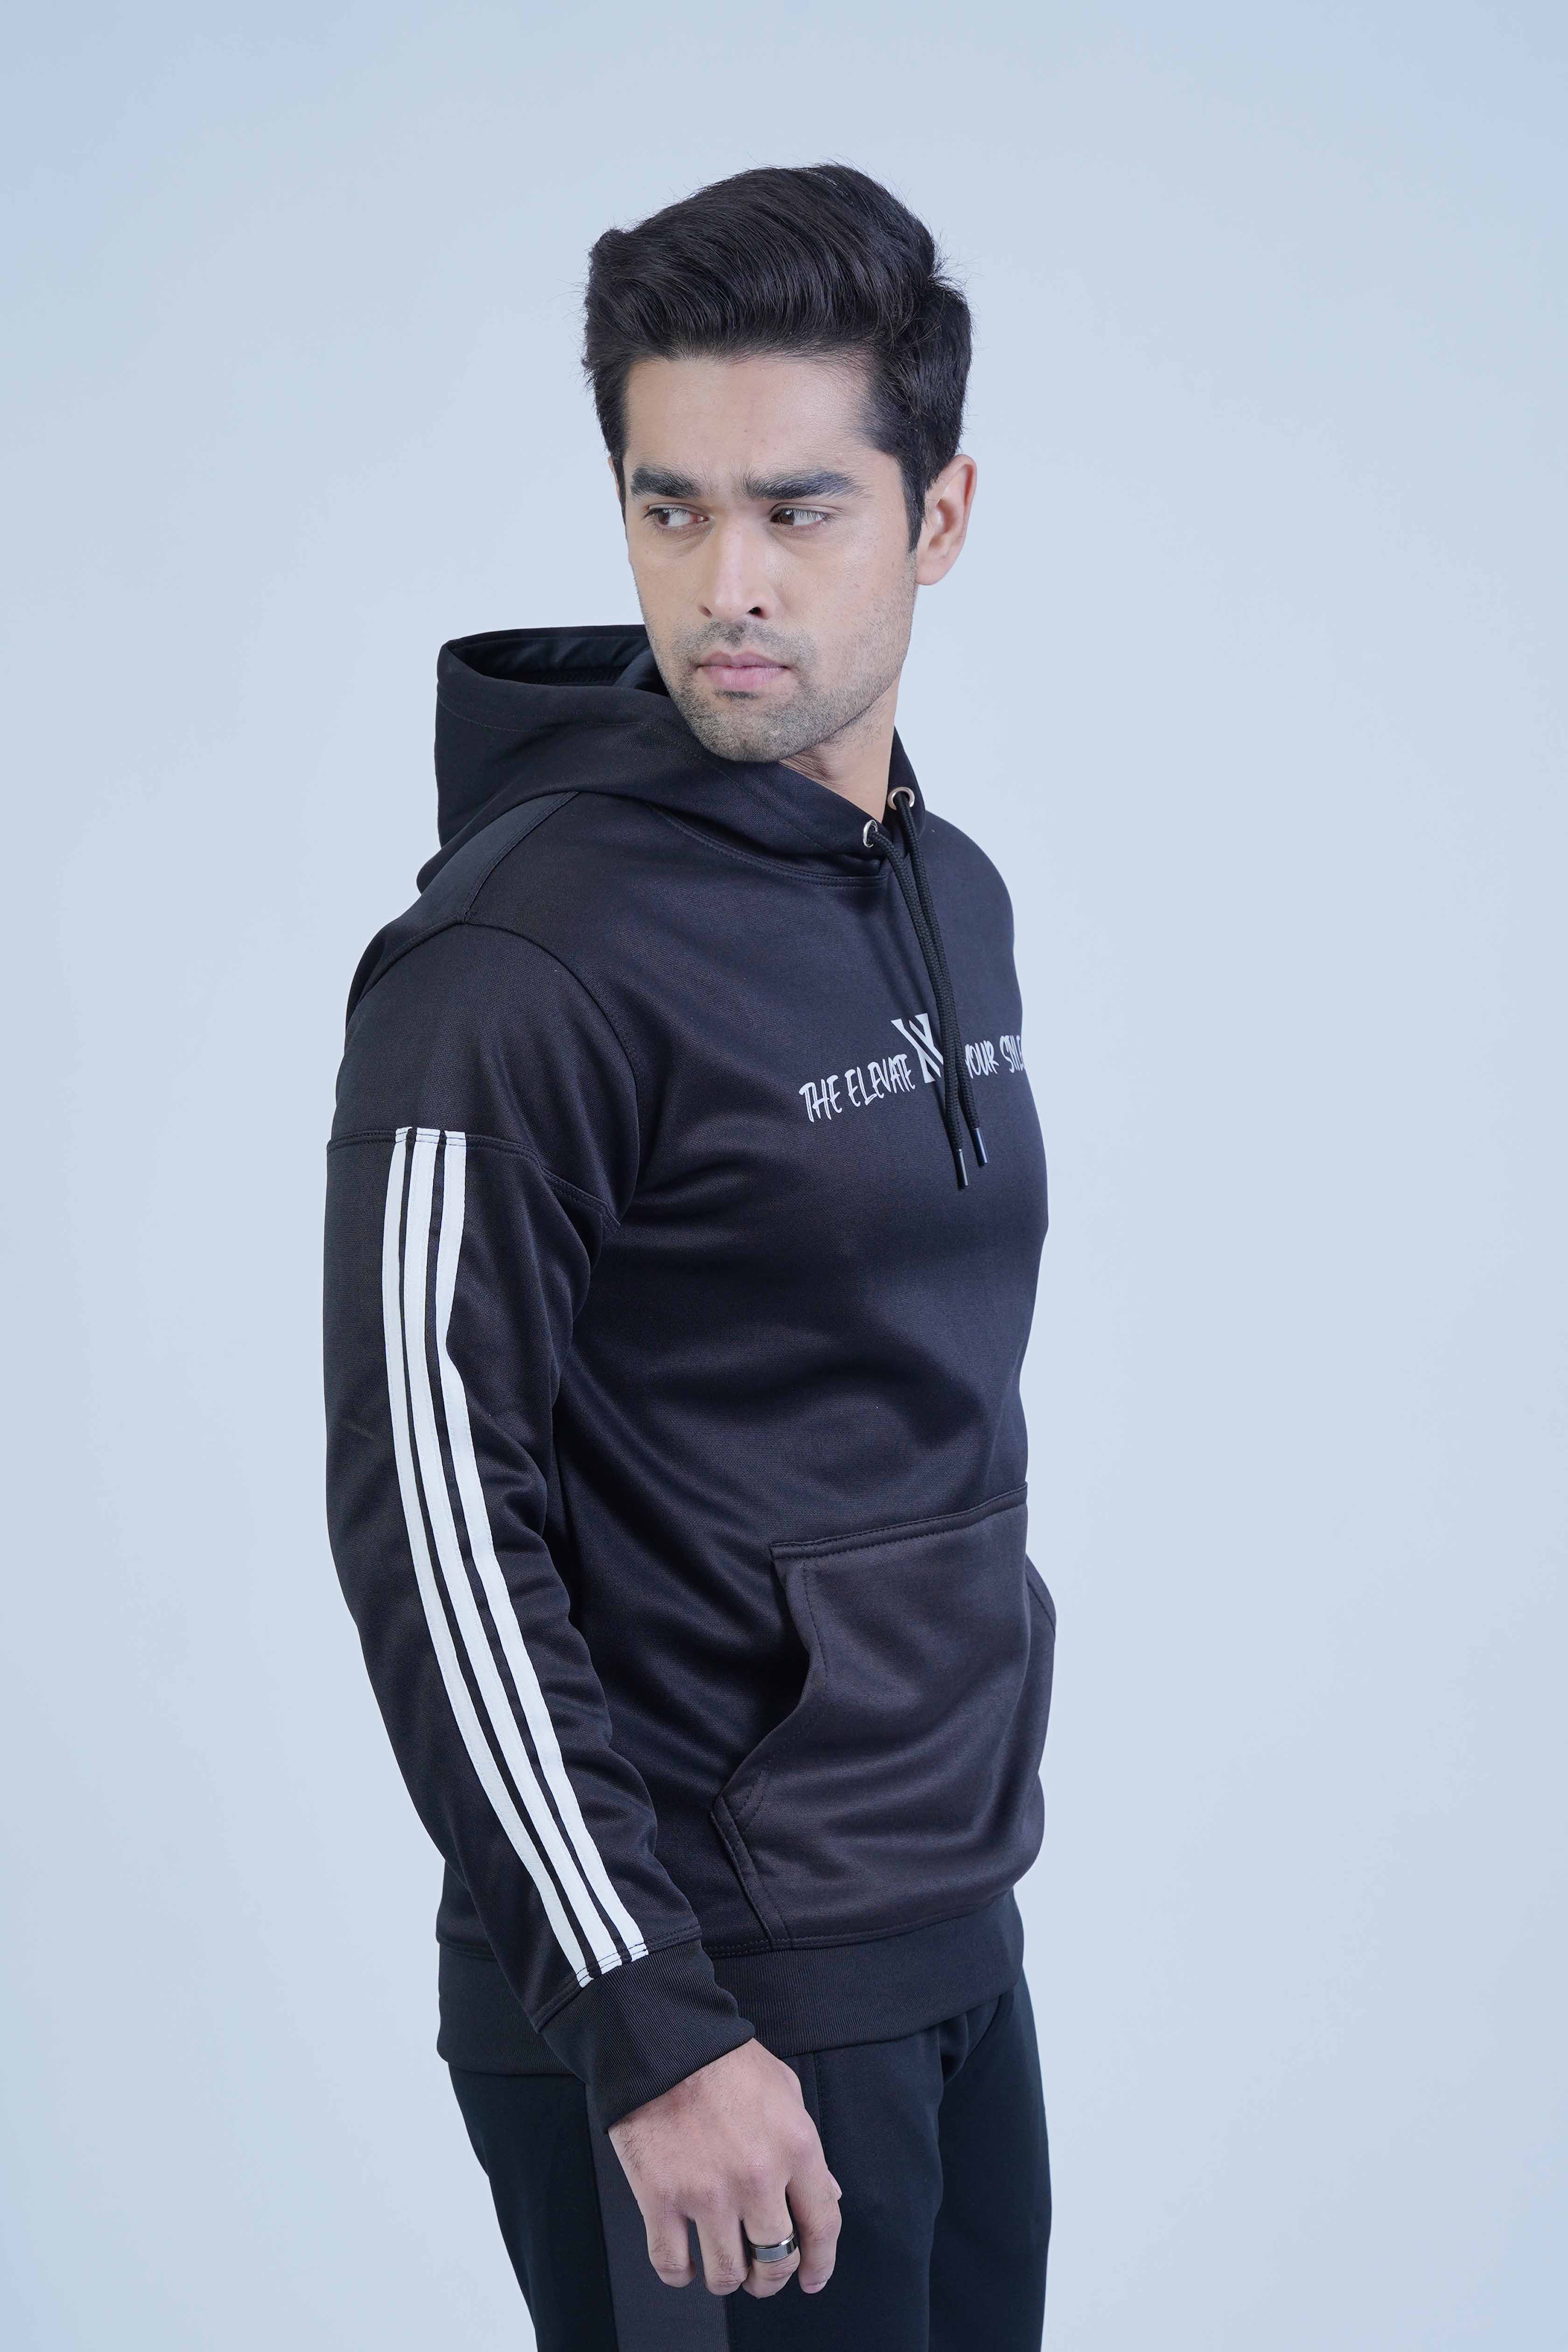 Urban 2.0 Hoodie: Classic Black Style by The Xea Men's Clothing